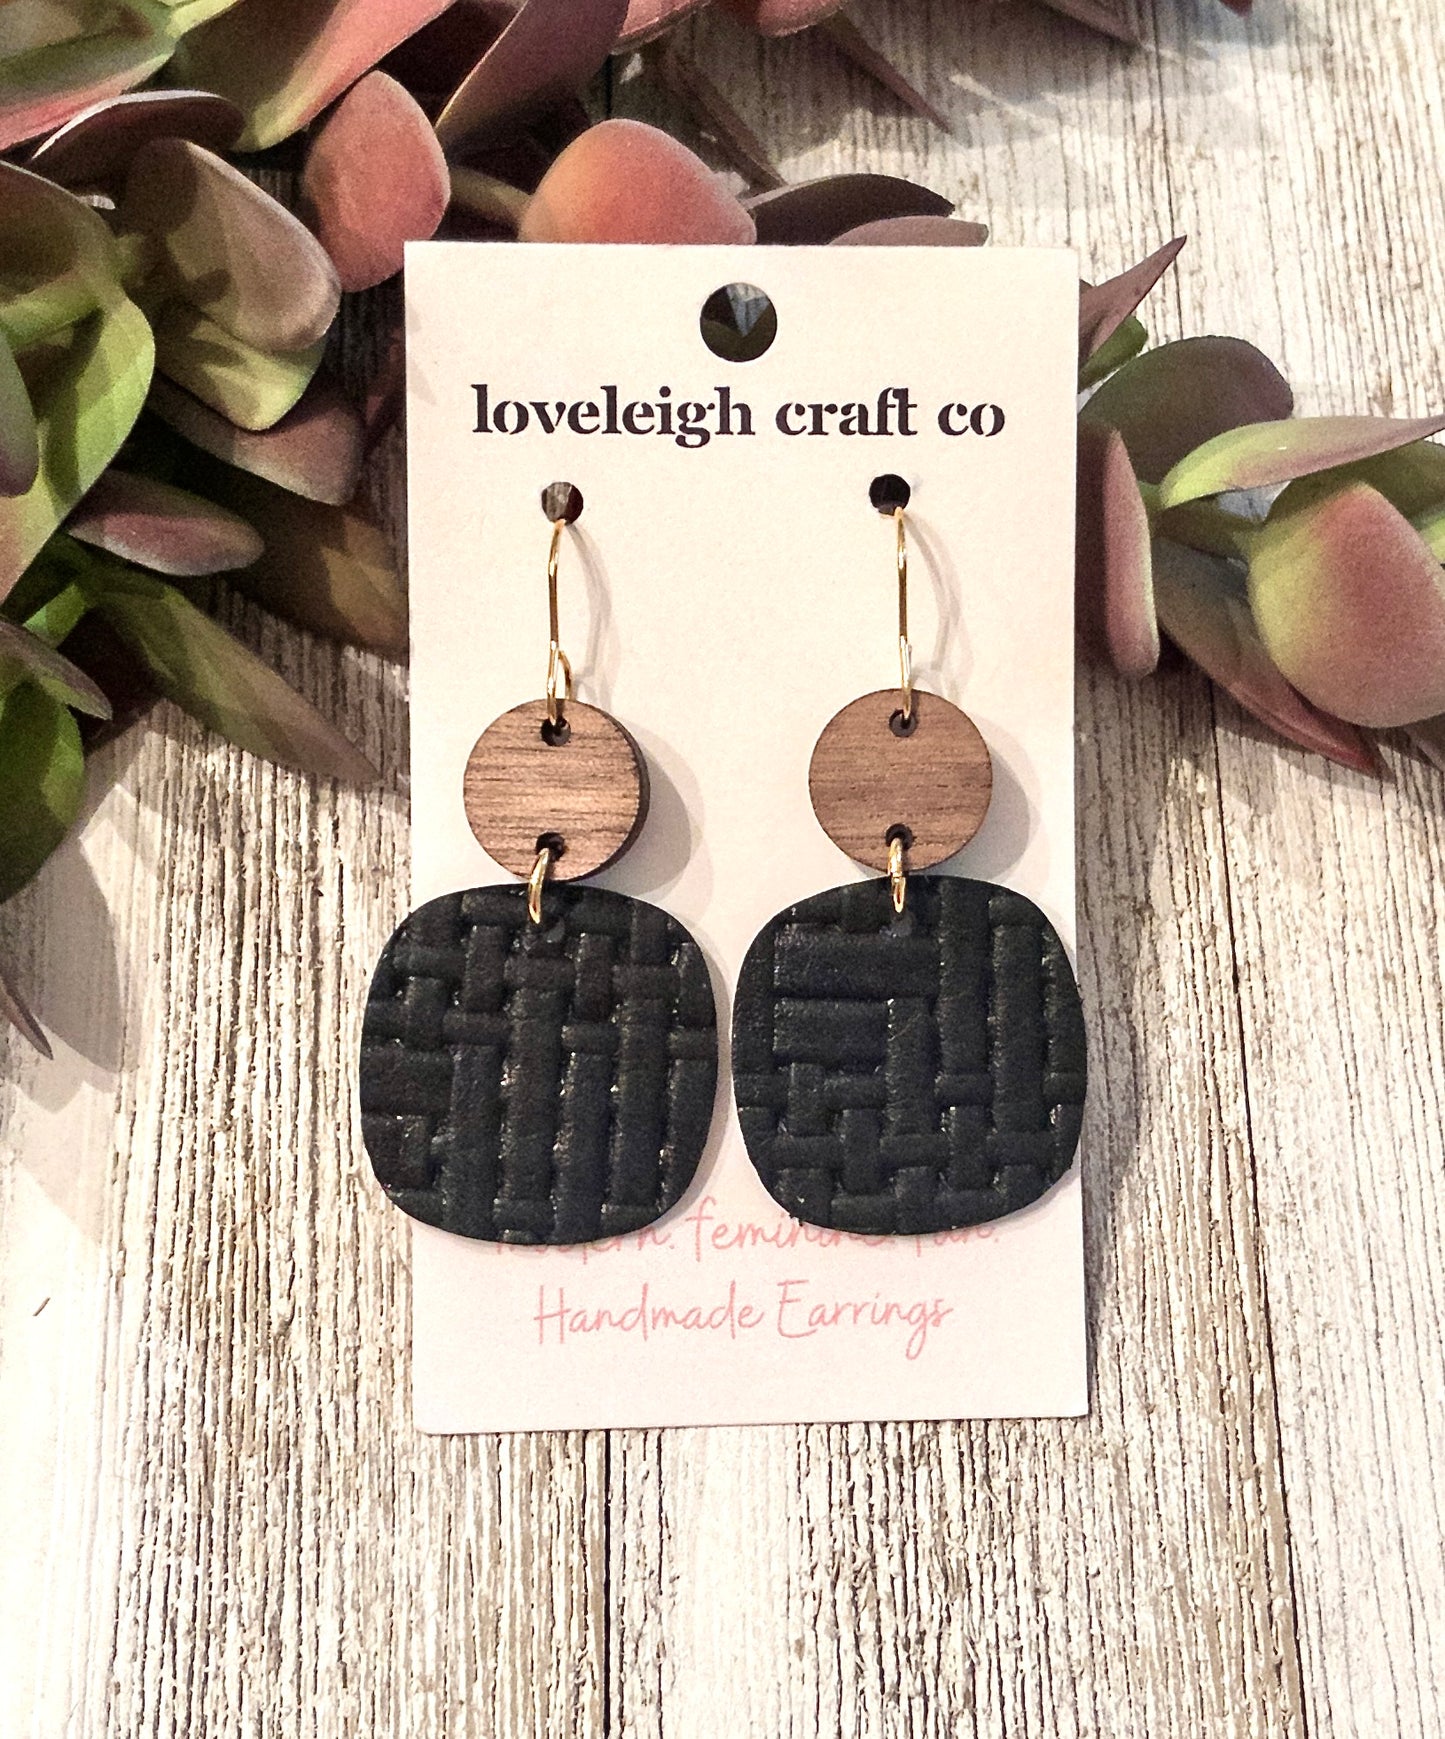 Cara Rounded Square Leather Earrings